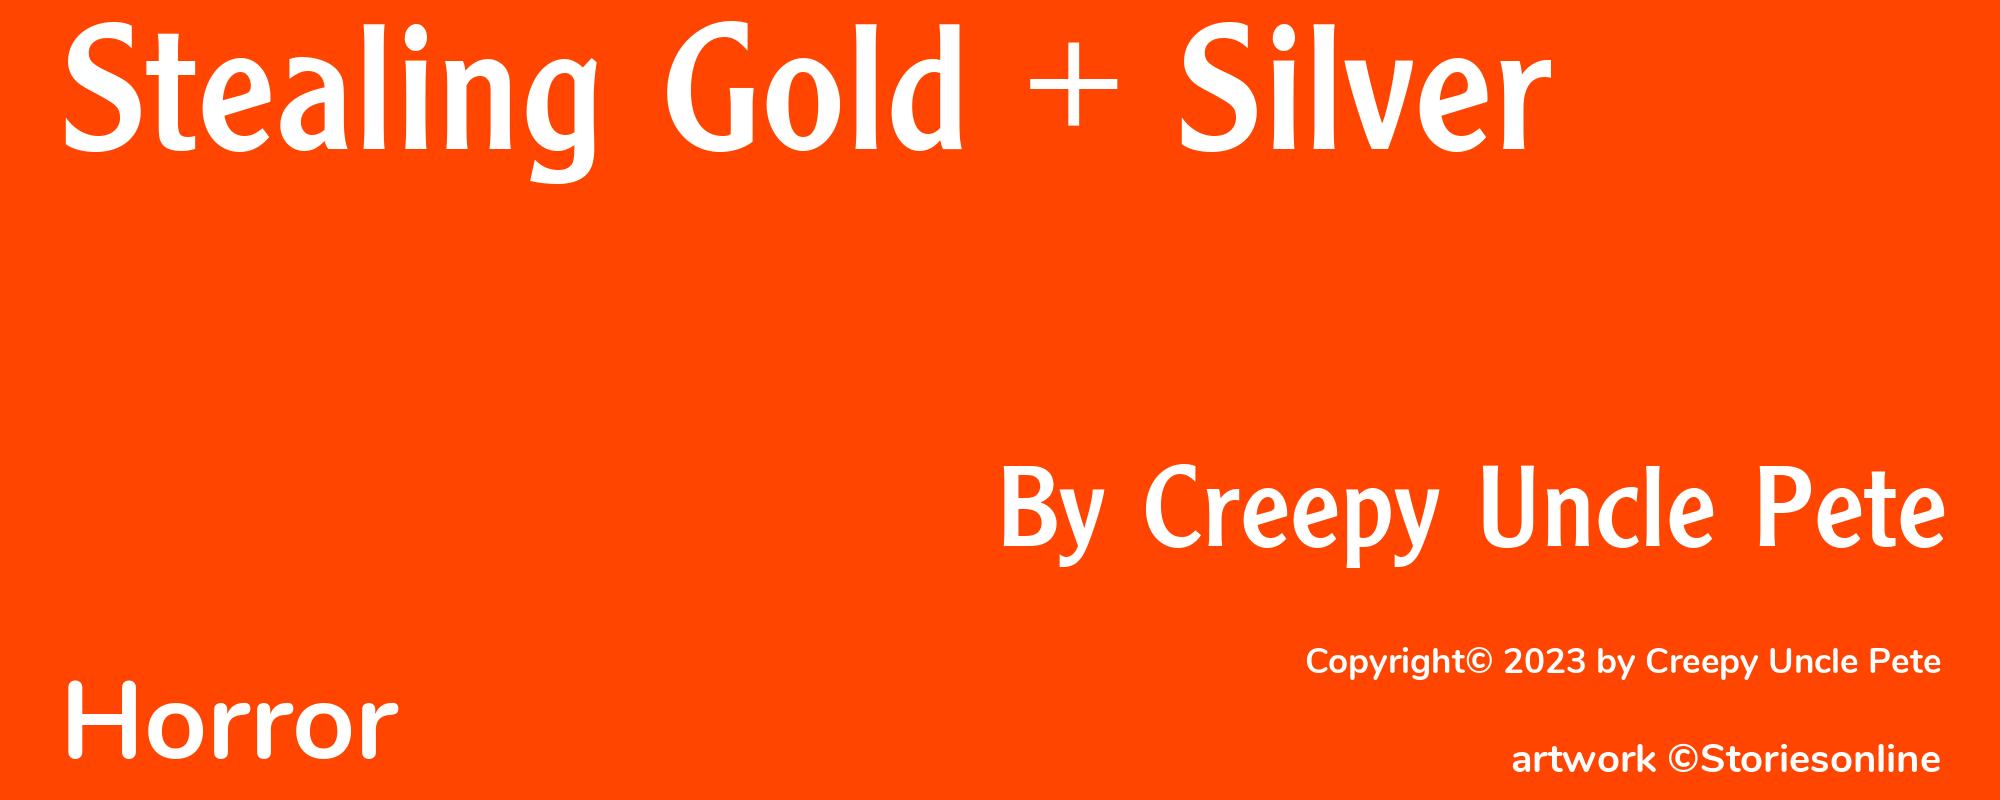 Stealing Gold + Silver - Cover